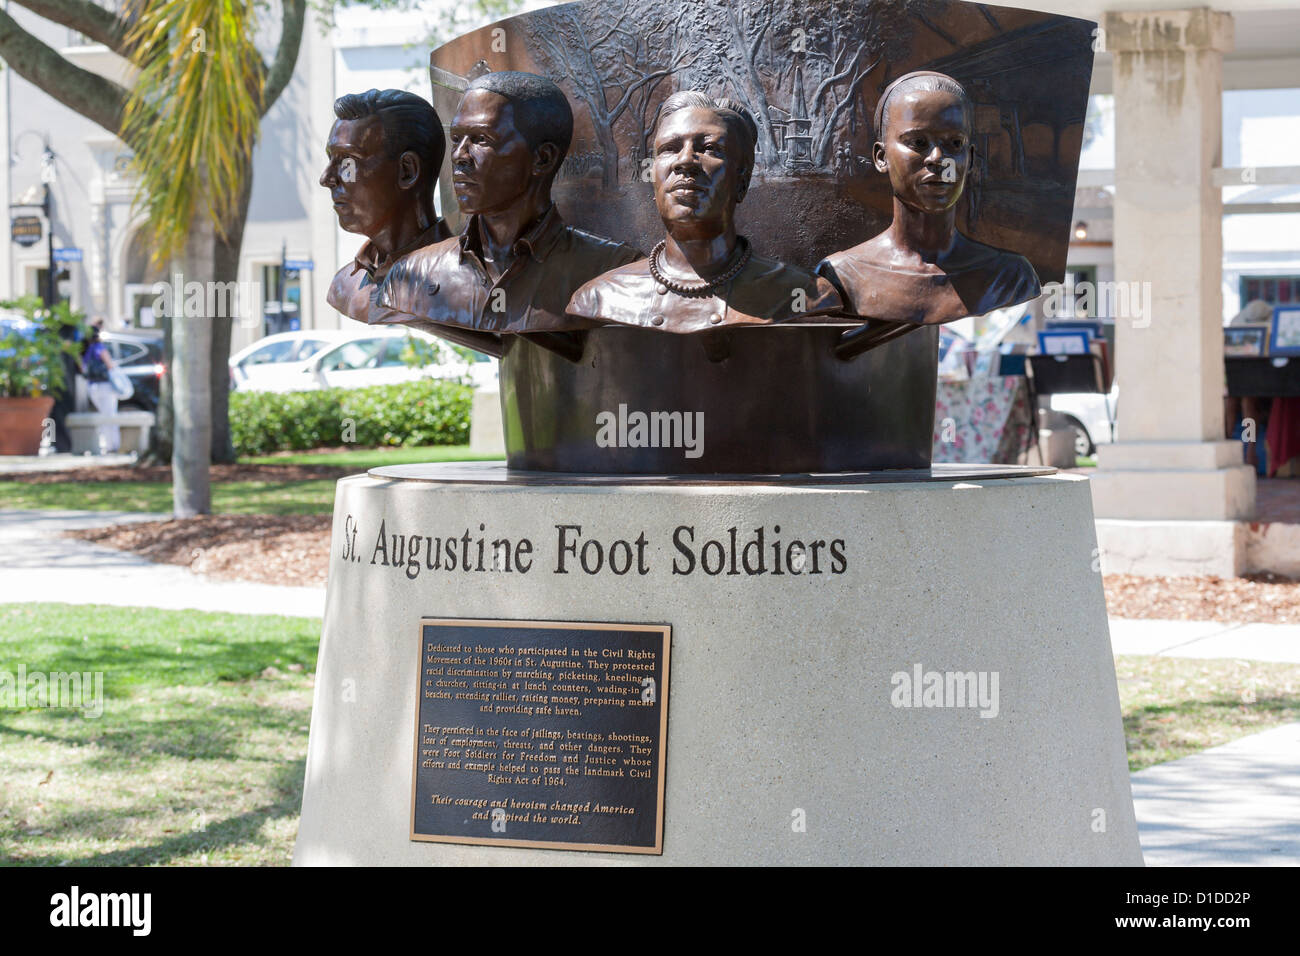 St. Augustine Foot Soldiers monument dedicated to civil rights movement participants in downtown St. Augustine, Florida USA Stock Photo